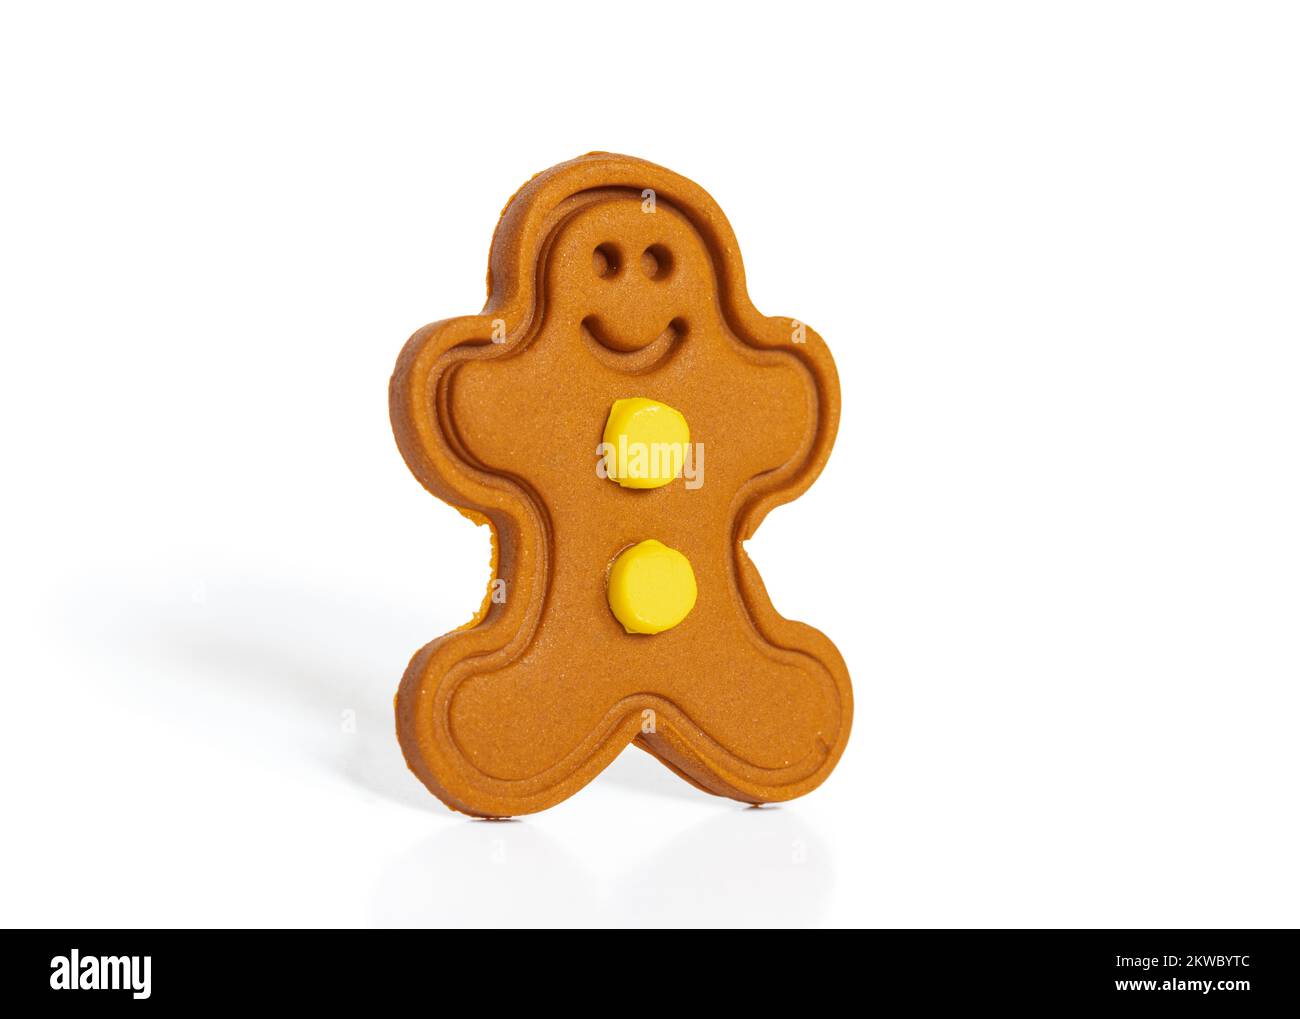 Gingerbread man figure on a white background Stock Photo